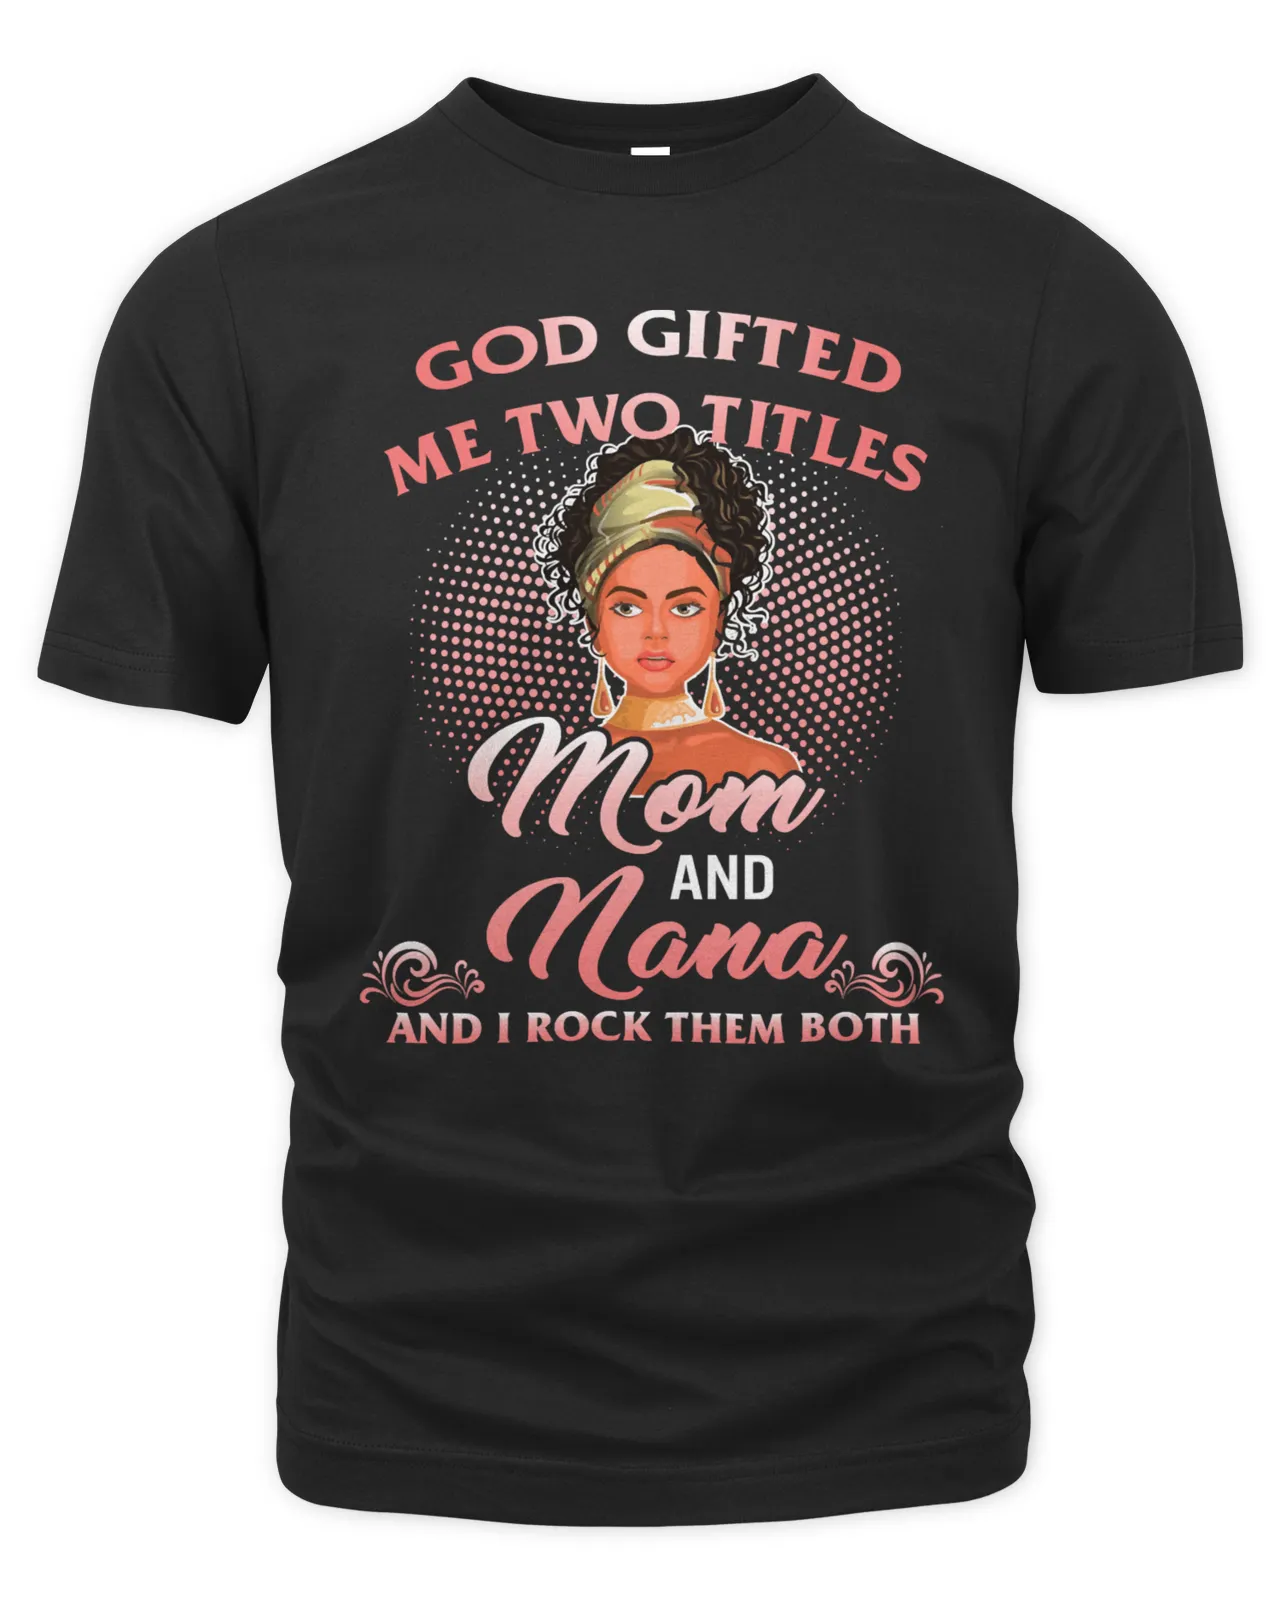 Gift For Mom Grandma Gift 18225032 Gift For Nana Mother's Day Gift God Gifted Me Two Titles Mom Nana Leopard Wink Woman Funny T-Shirt